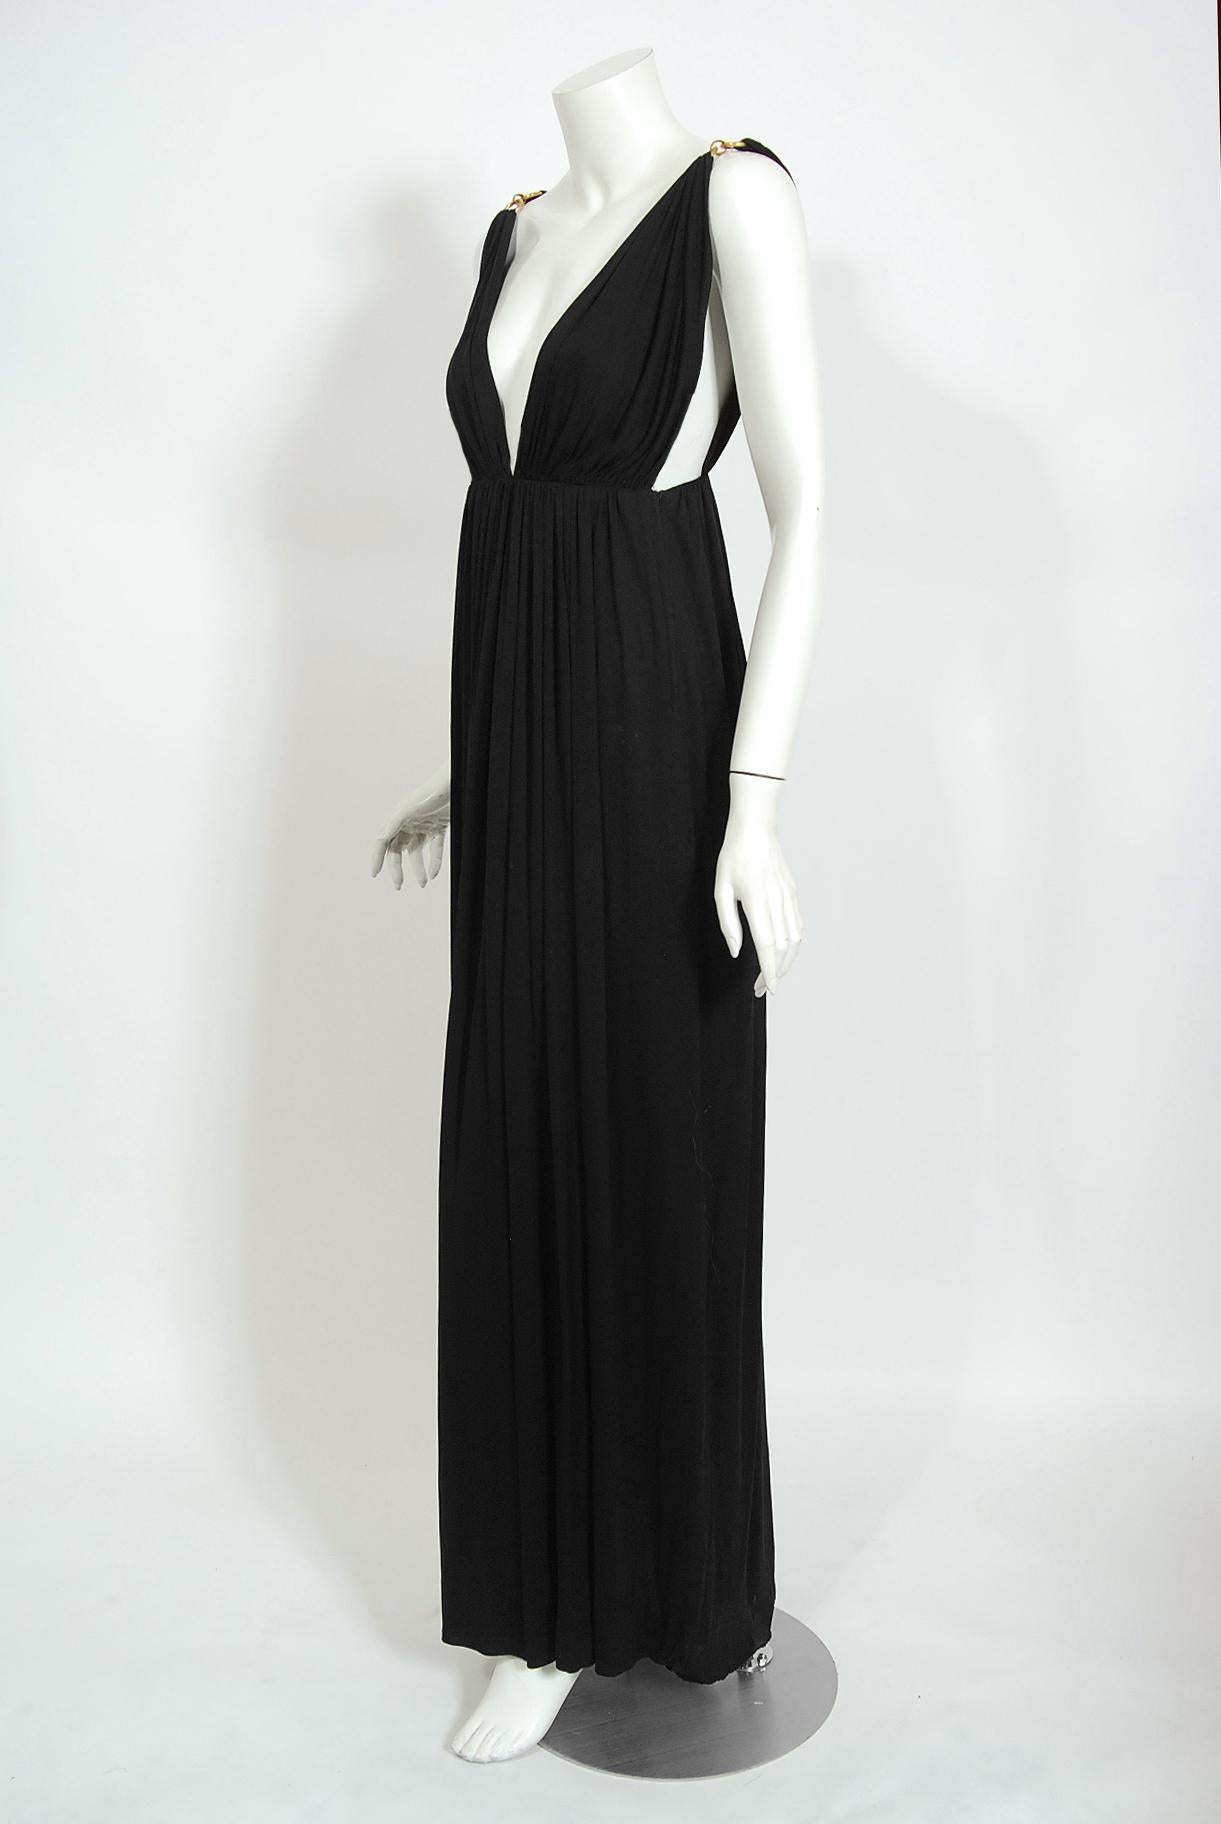 Seductive black jersey full-length maxi dress from the infamous Yves Saint Laurent Rive Gauche collection of fall-winter 1975. The same gown in navy blue in archived at the Victoria and Albert Museum in London. Pieces from this decade are very rare